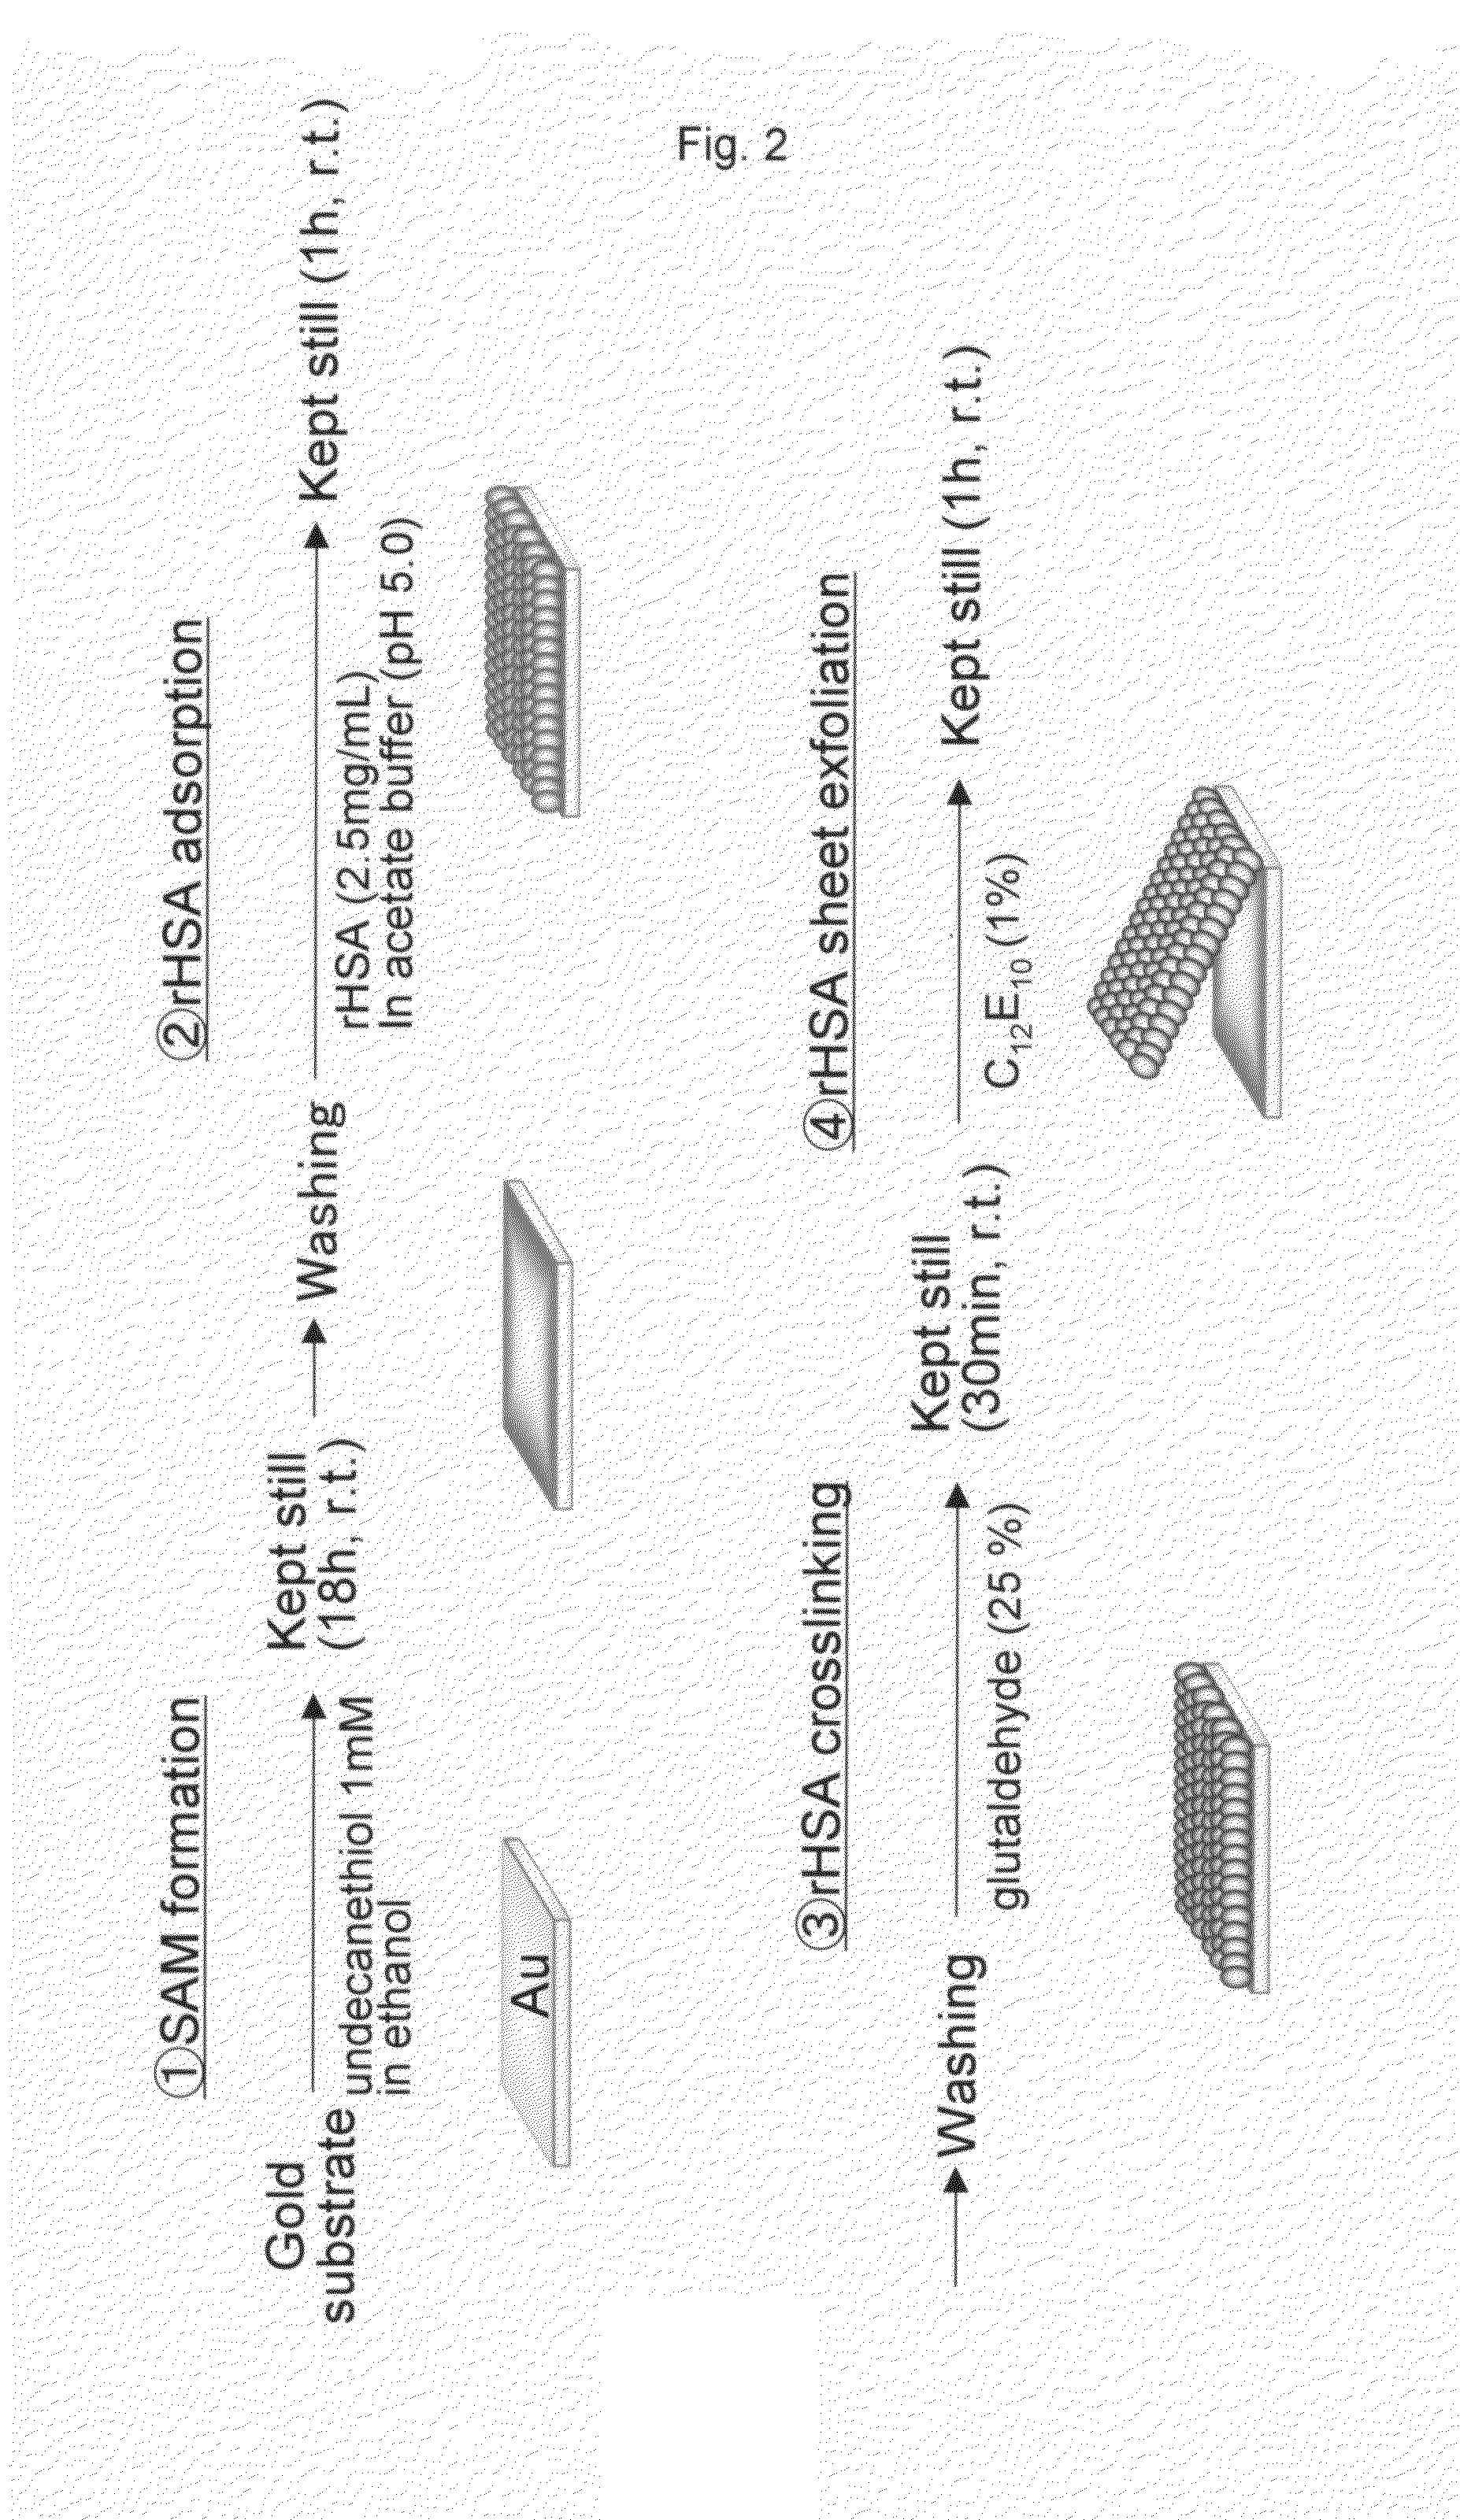 Thin-Filmy Polymeric Structure and Method of Preparing the Same